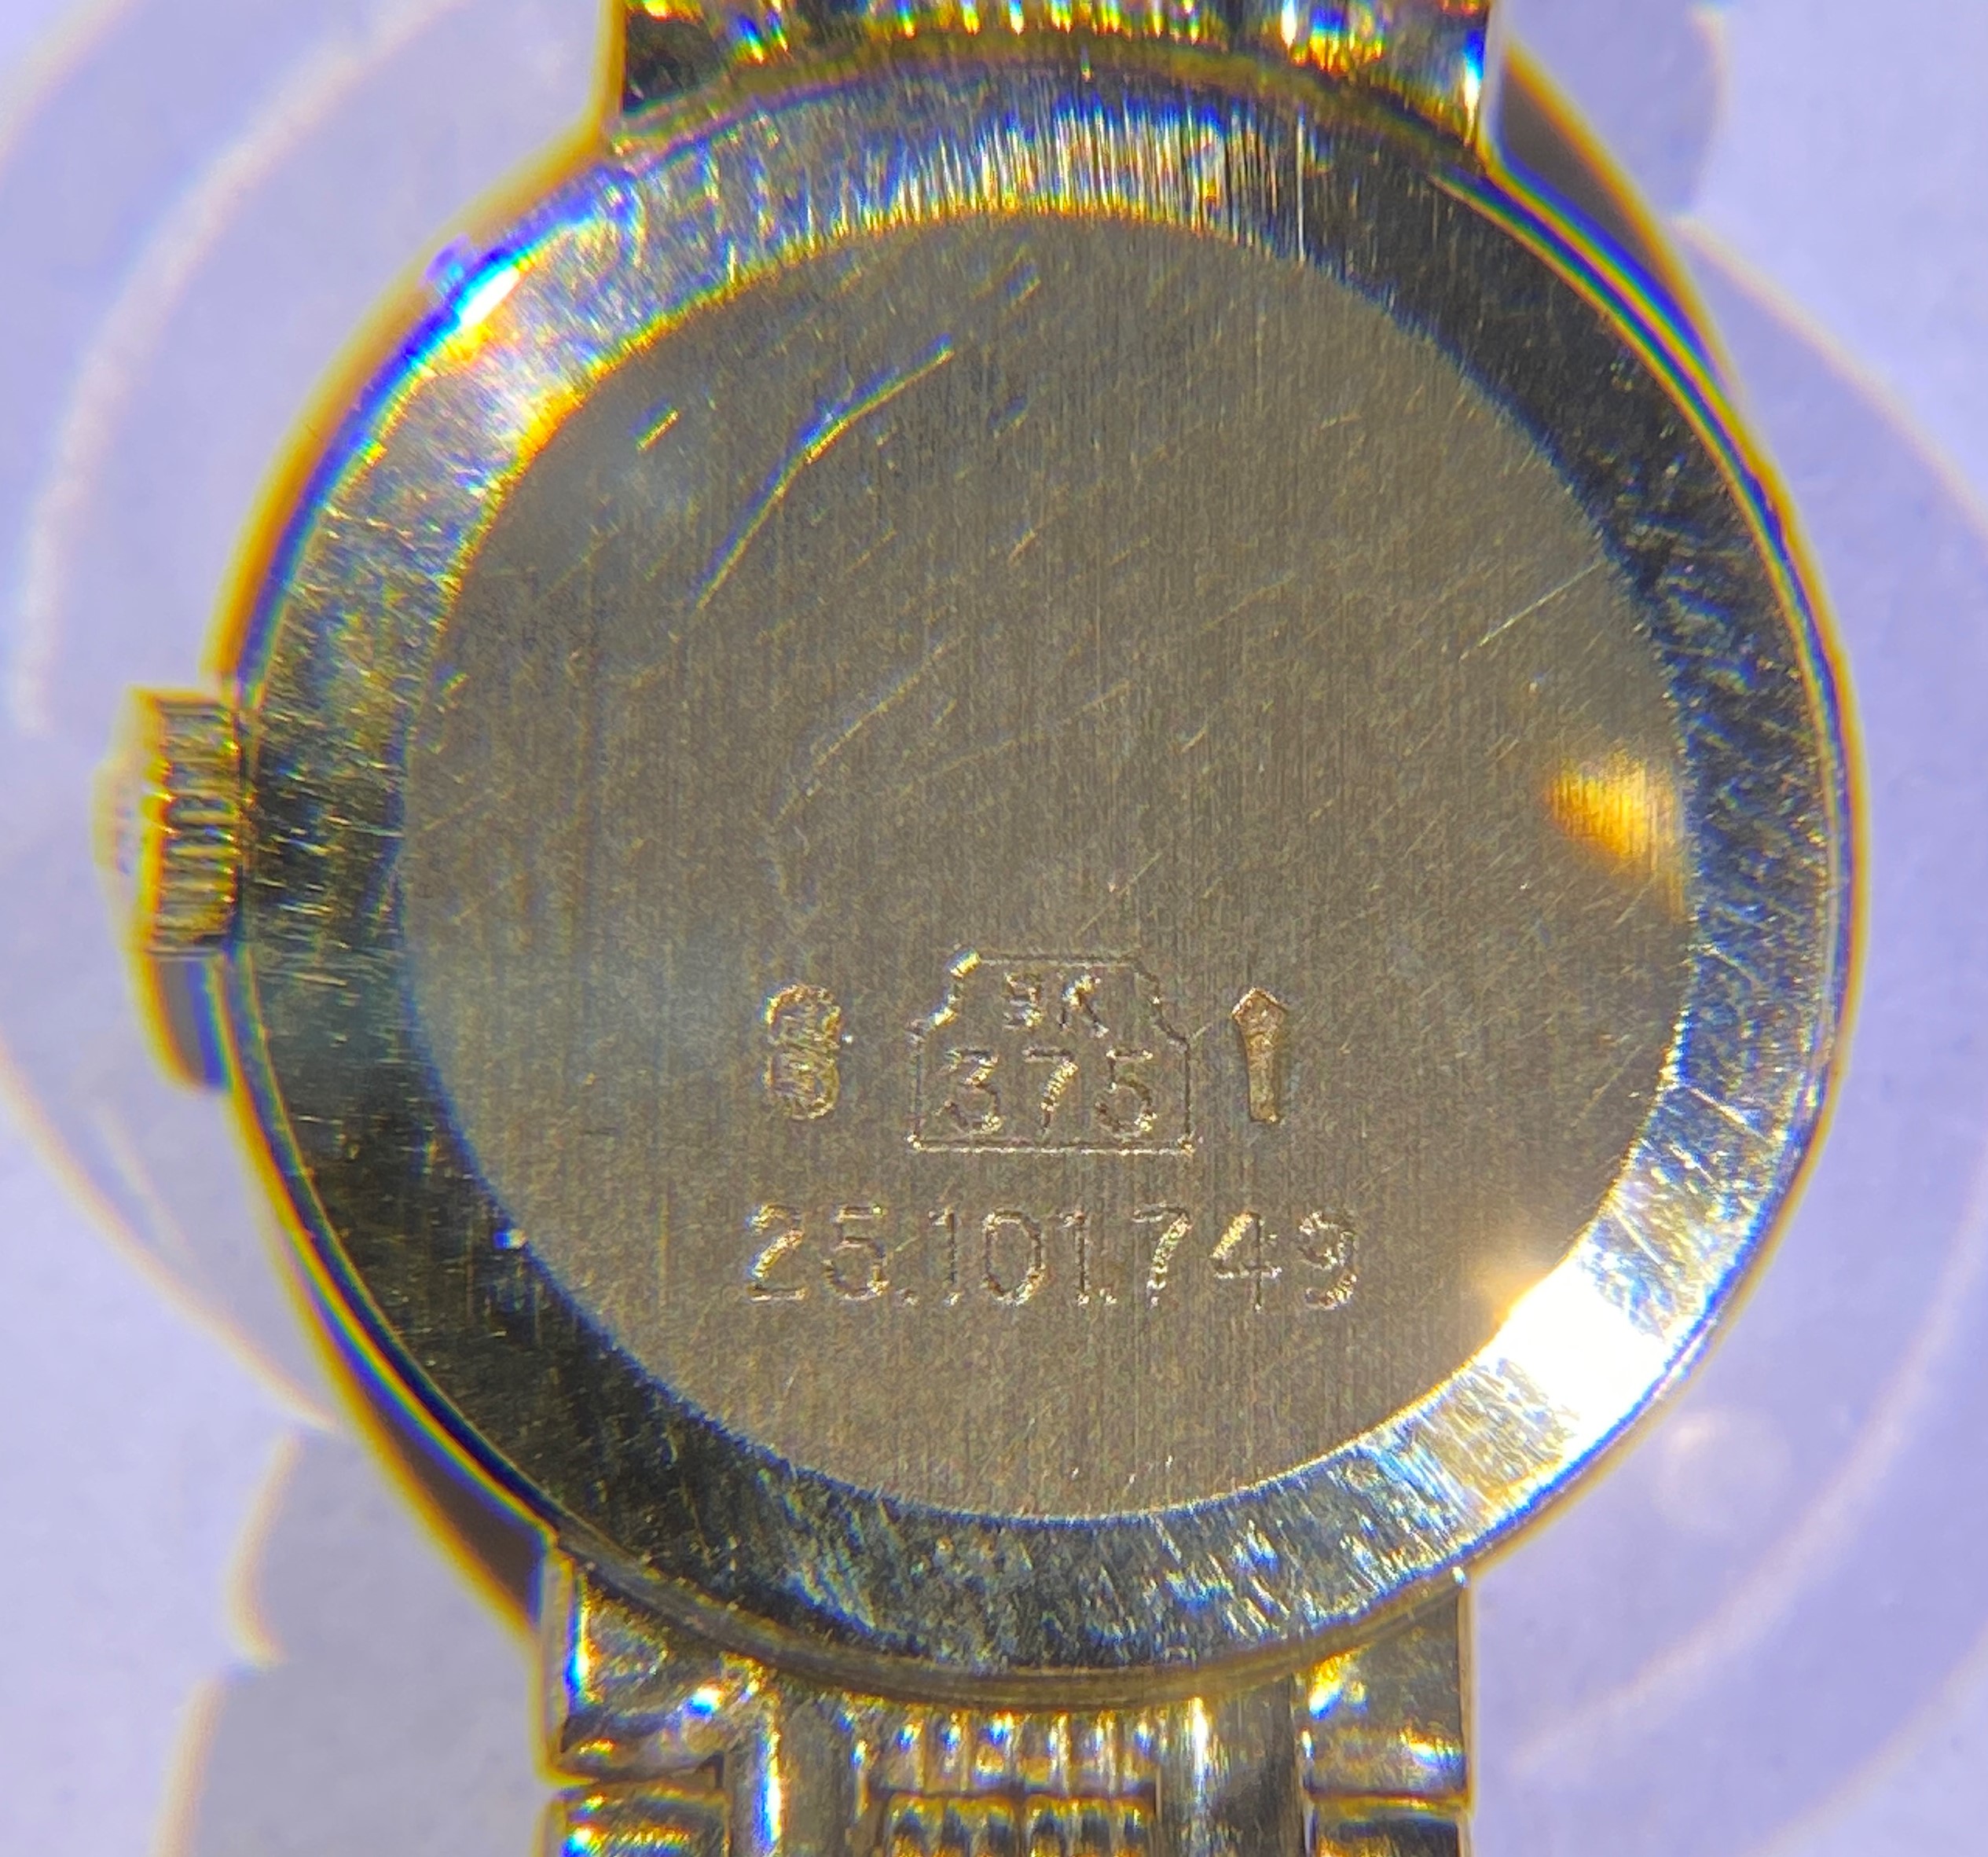 Lady's Longines 9ct Gold Bracelet Dress Watch with unusual clock face showing 2 x'9' instead of '8' - Image 13 of 14